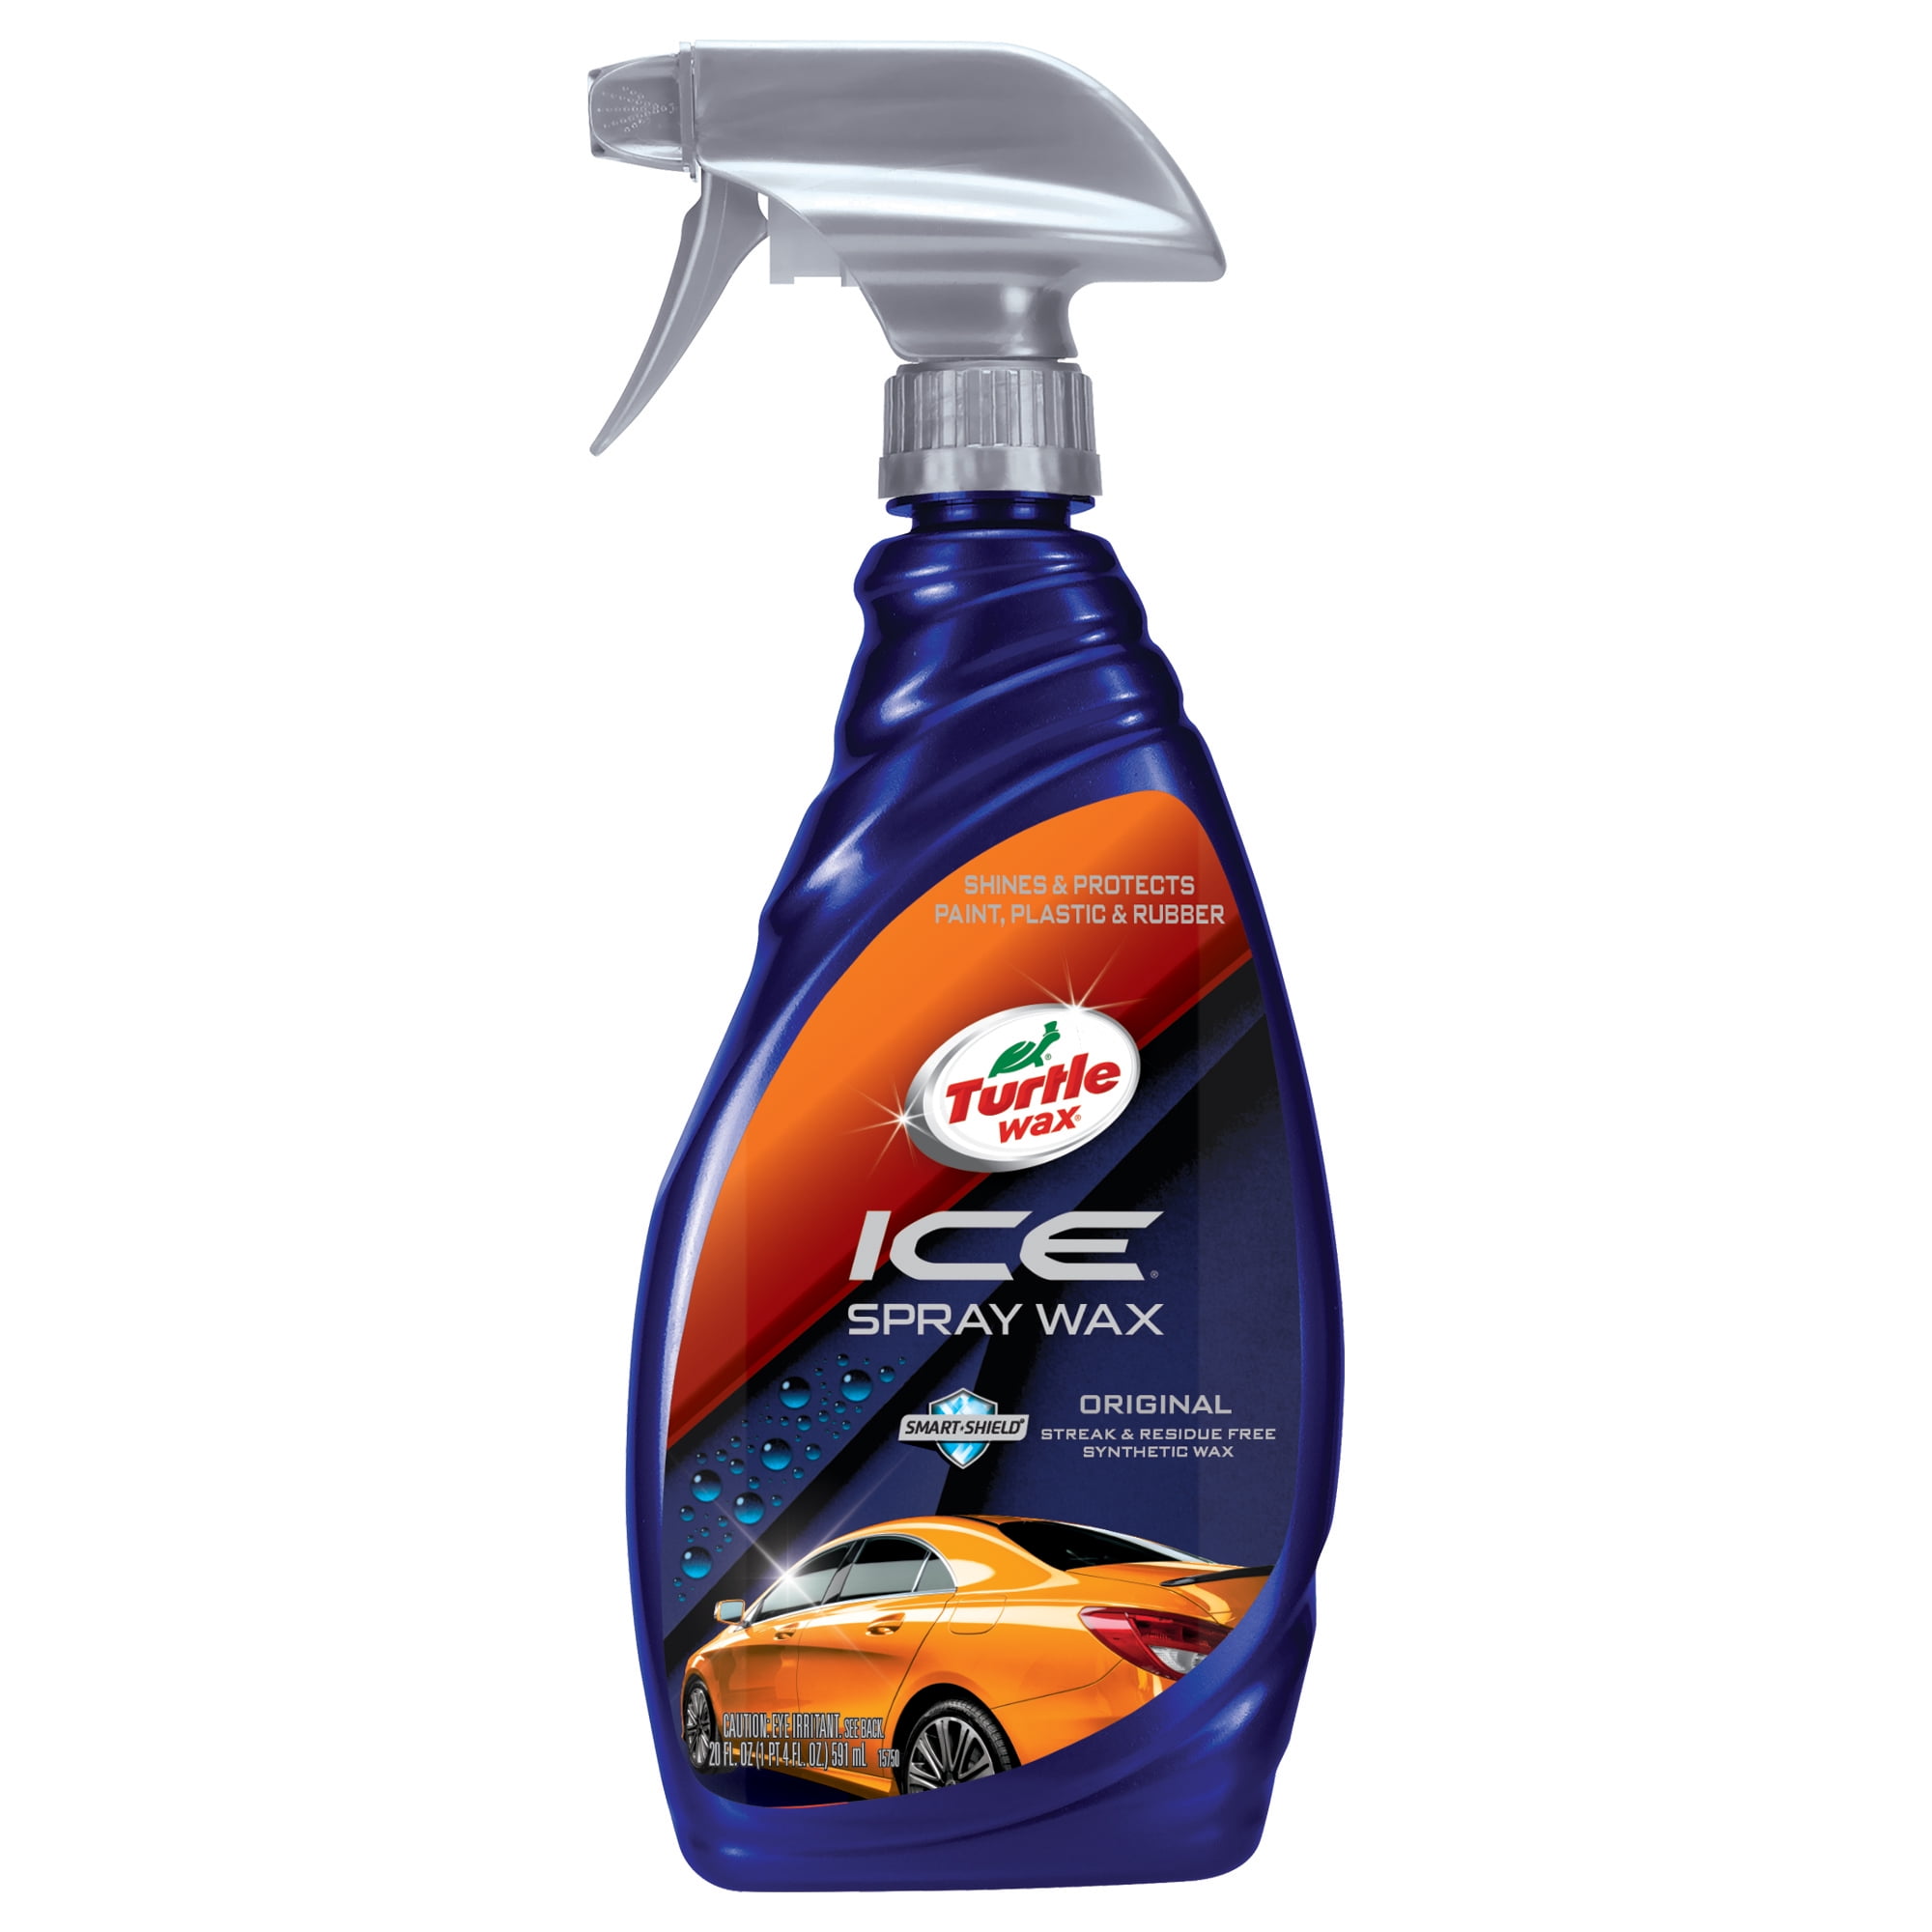 Replacement for Turtle Wax Ice?, Page 2